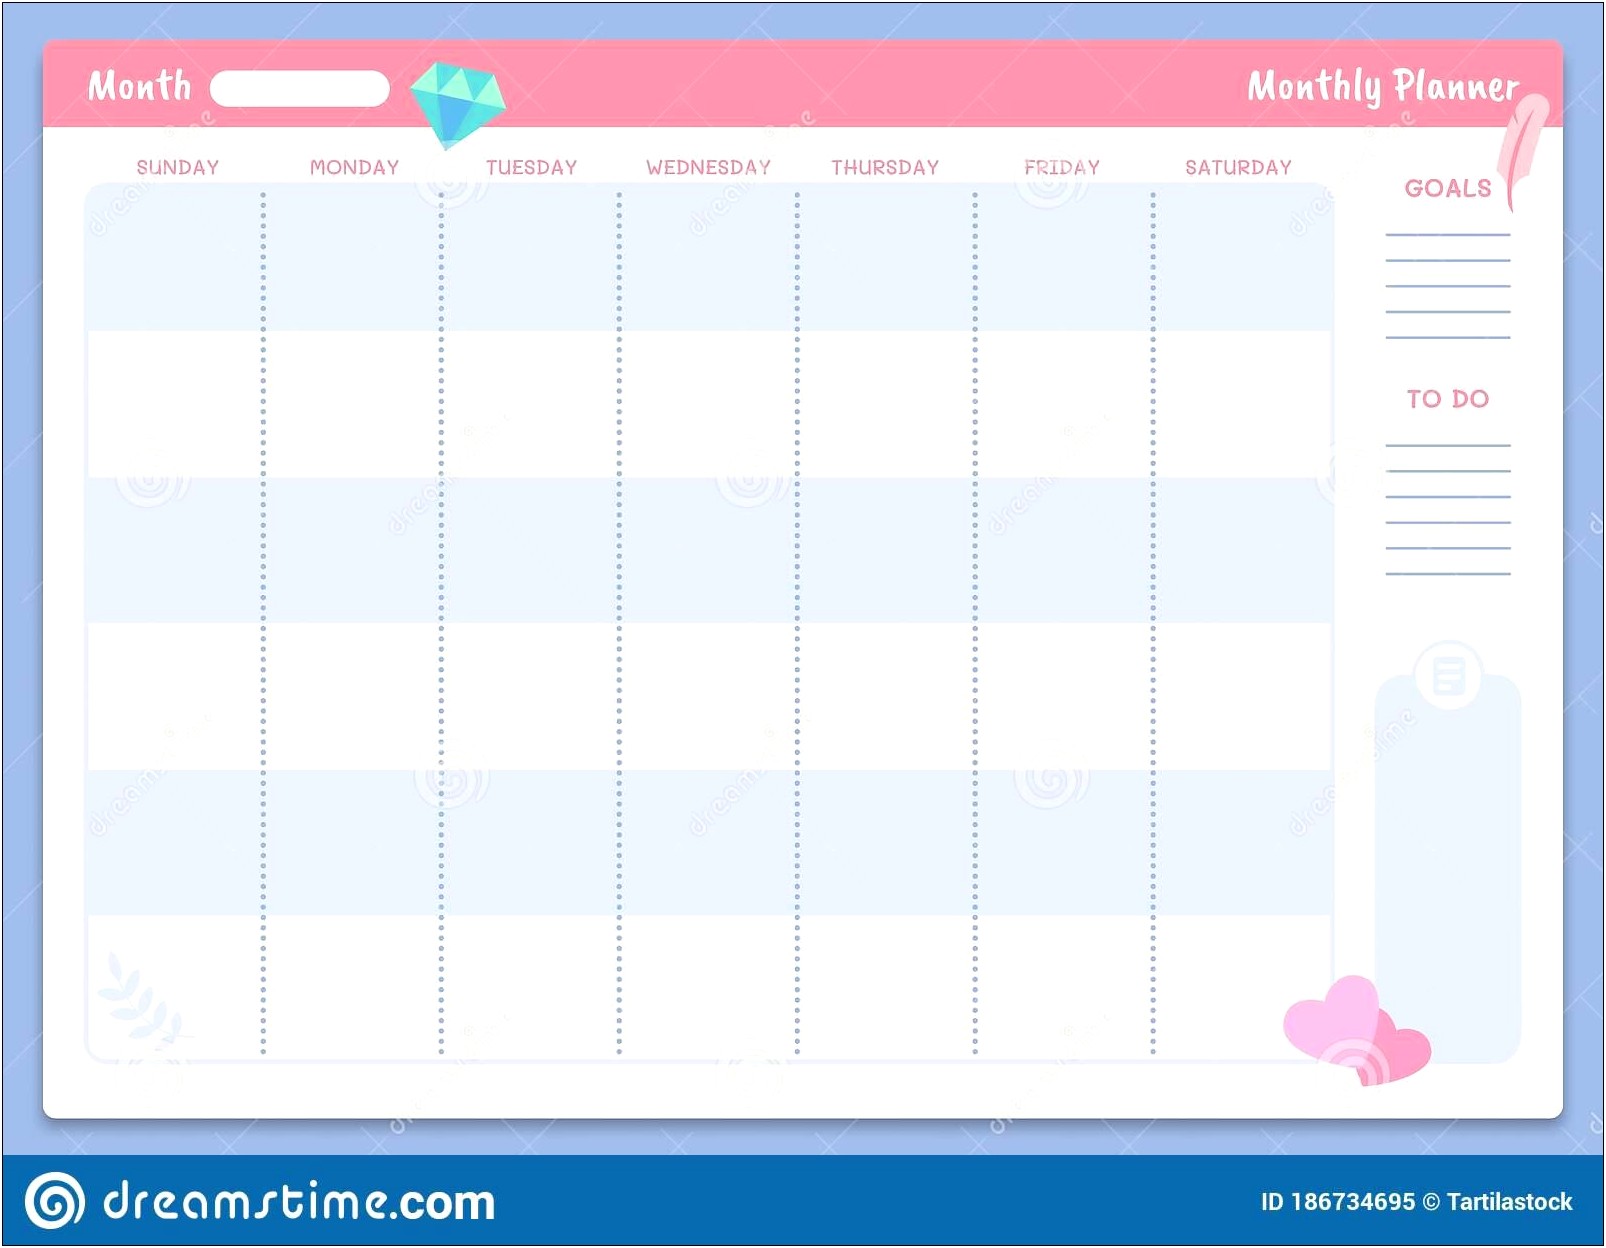 Free Monthly Calendar Template Without Weekends